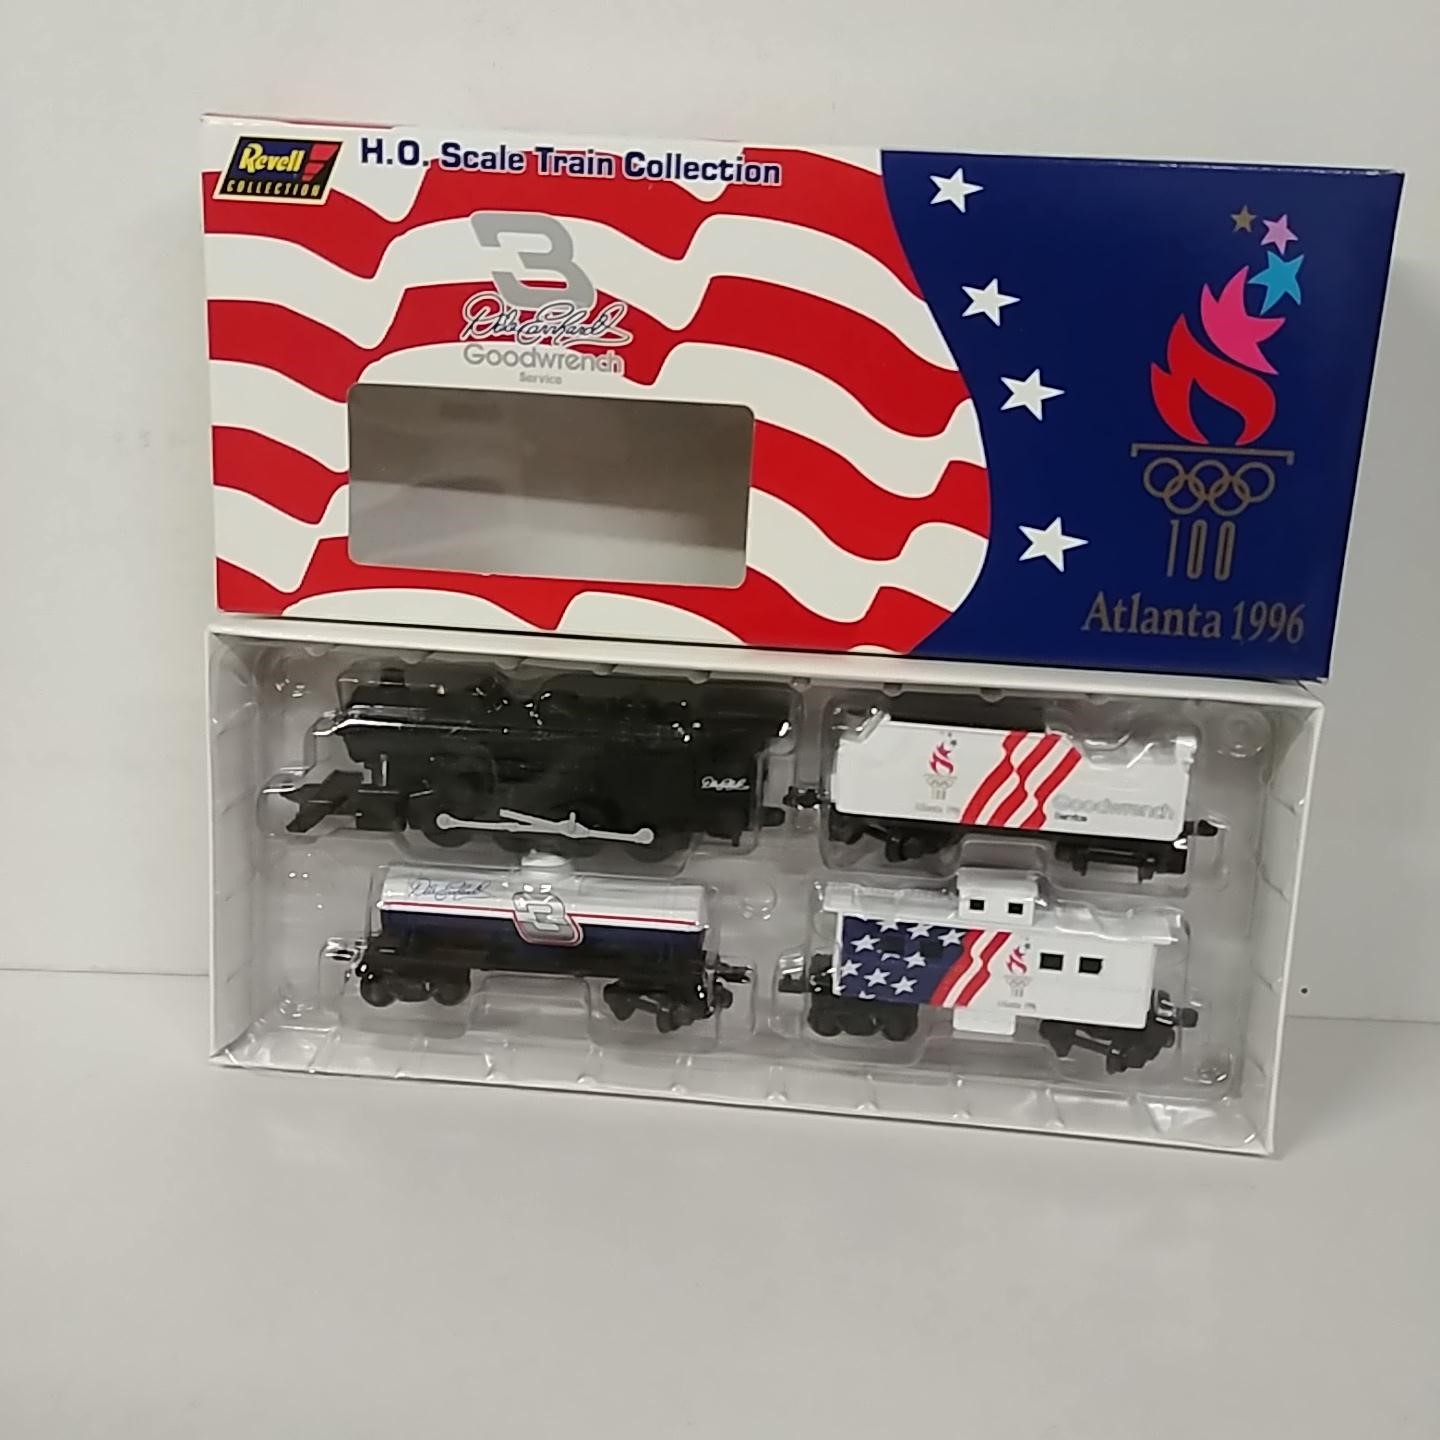 1996 Dale Earnhardt 1/64th Goodwrench "Olympics" Revell 4 piece train set